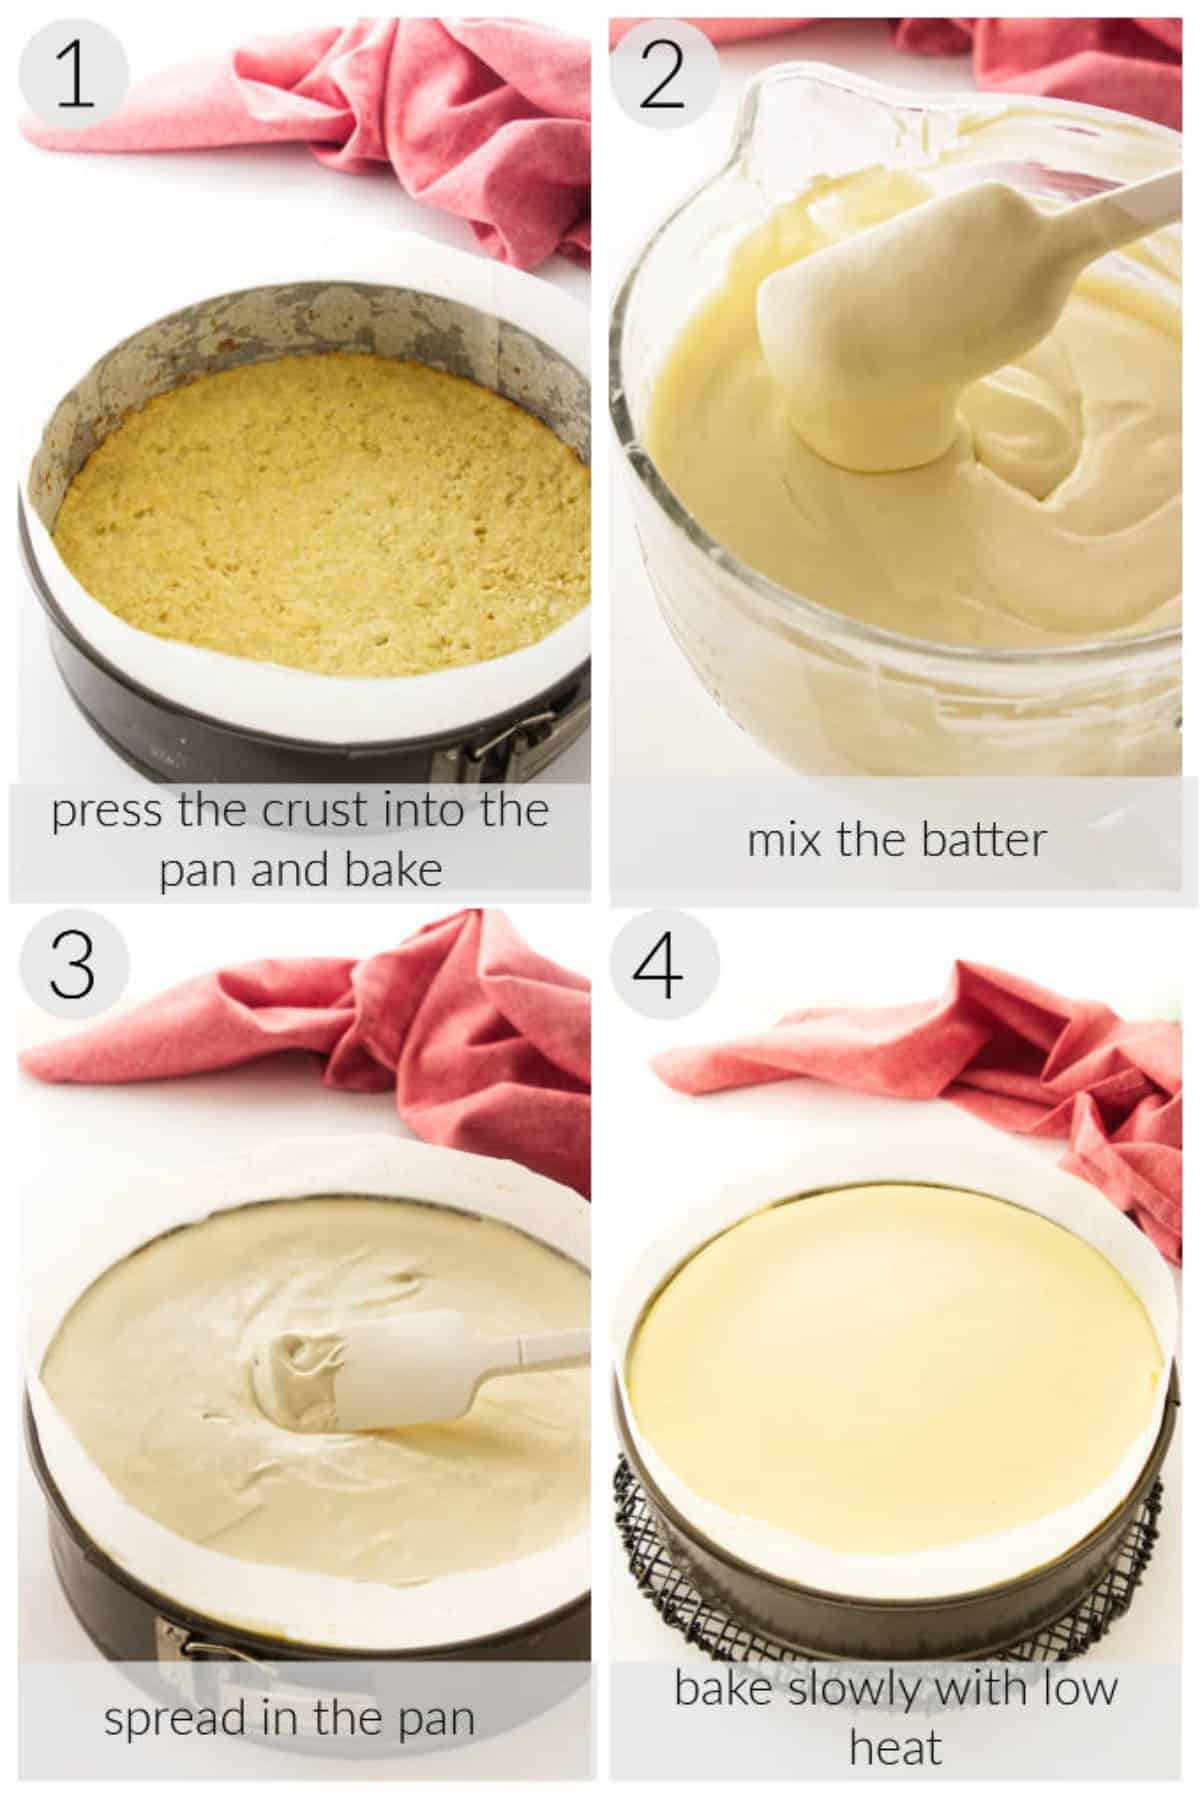 step by step instructions for making a cheesecake without a water bath.